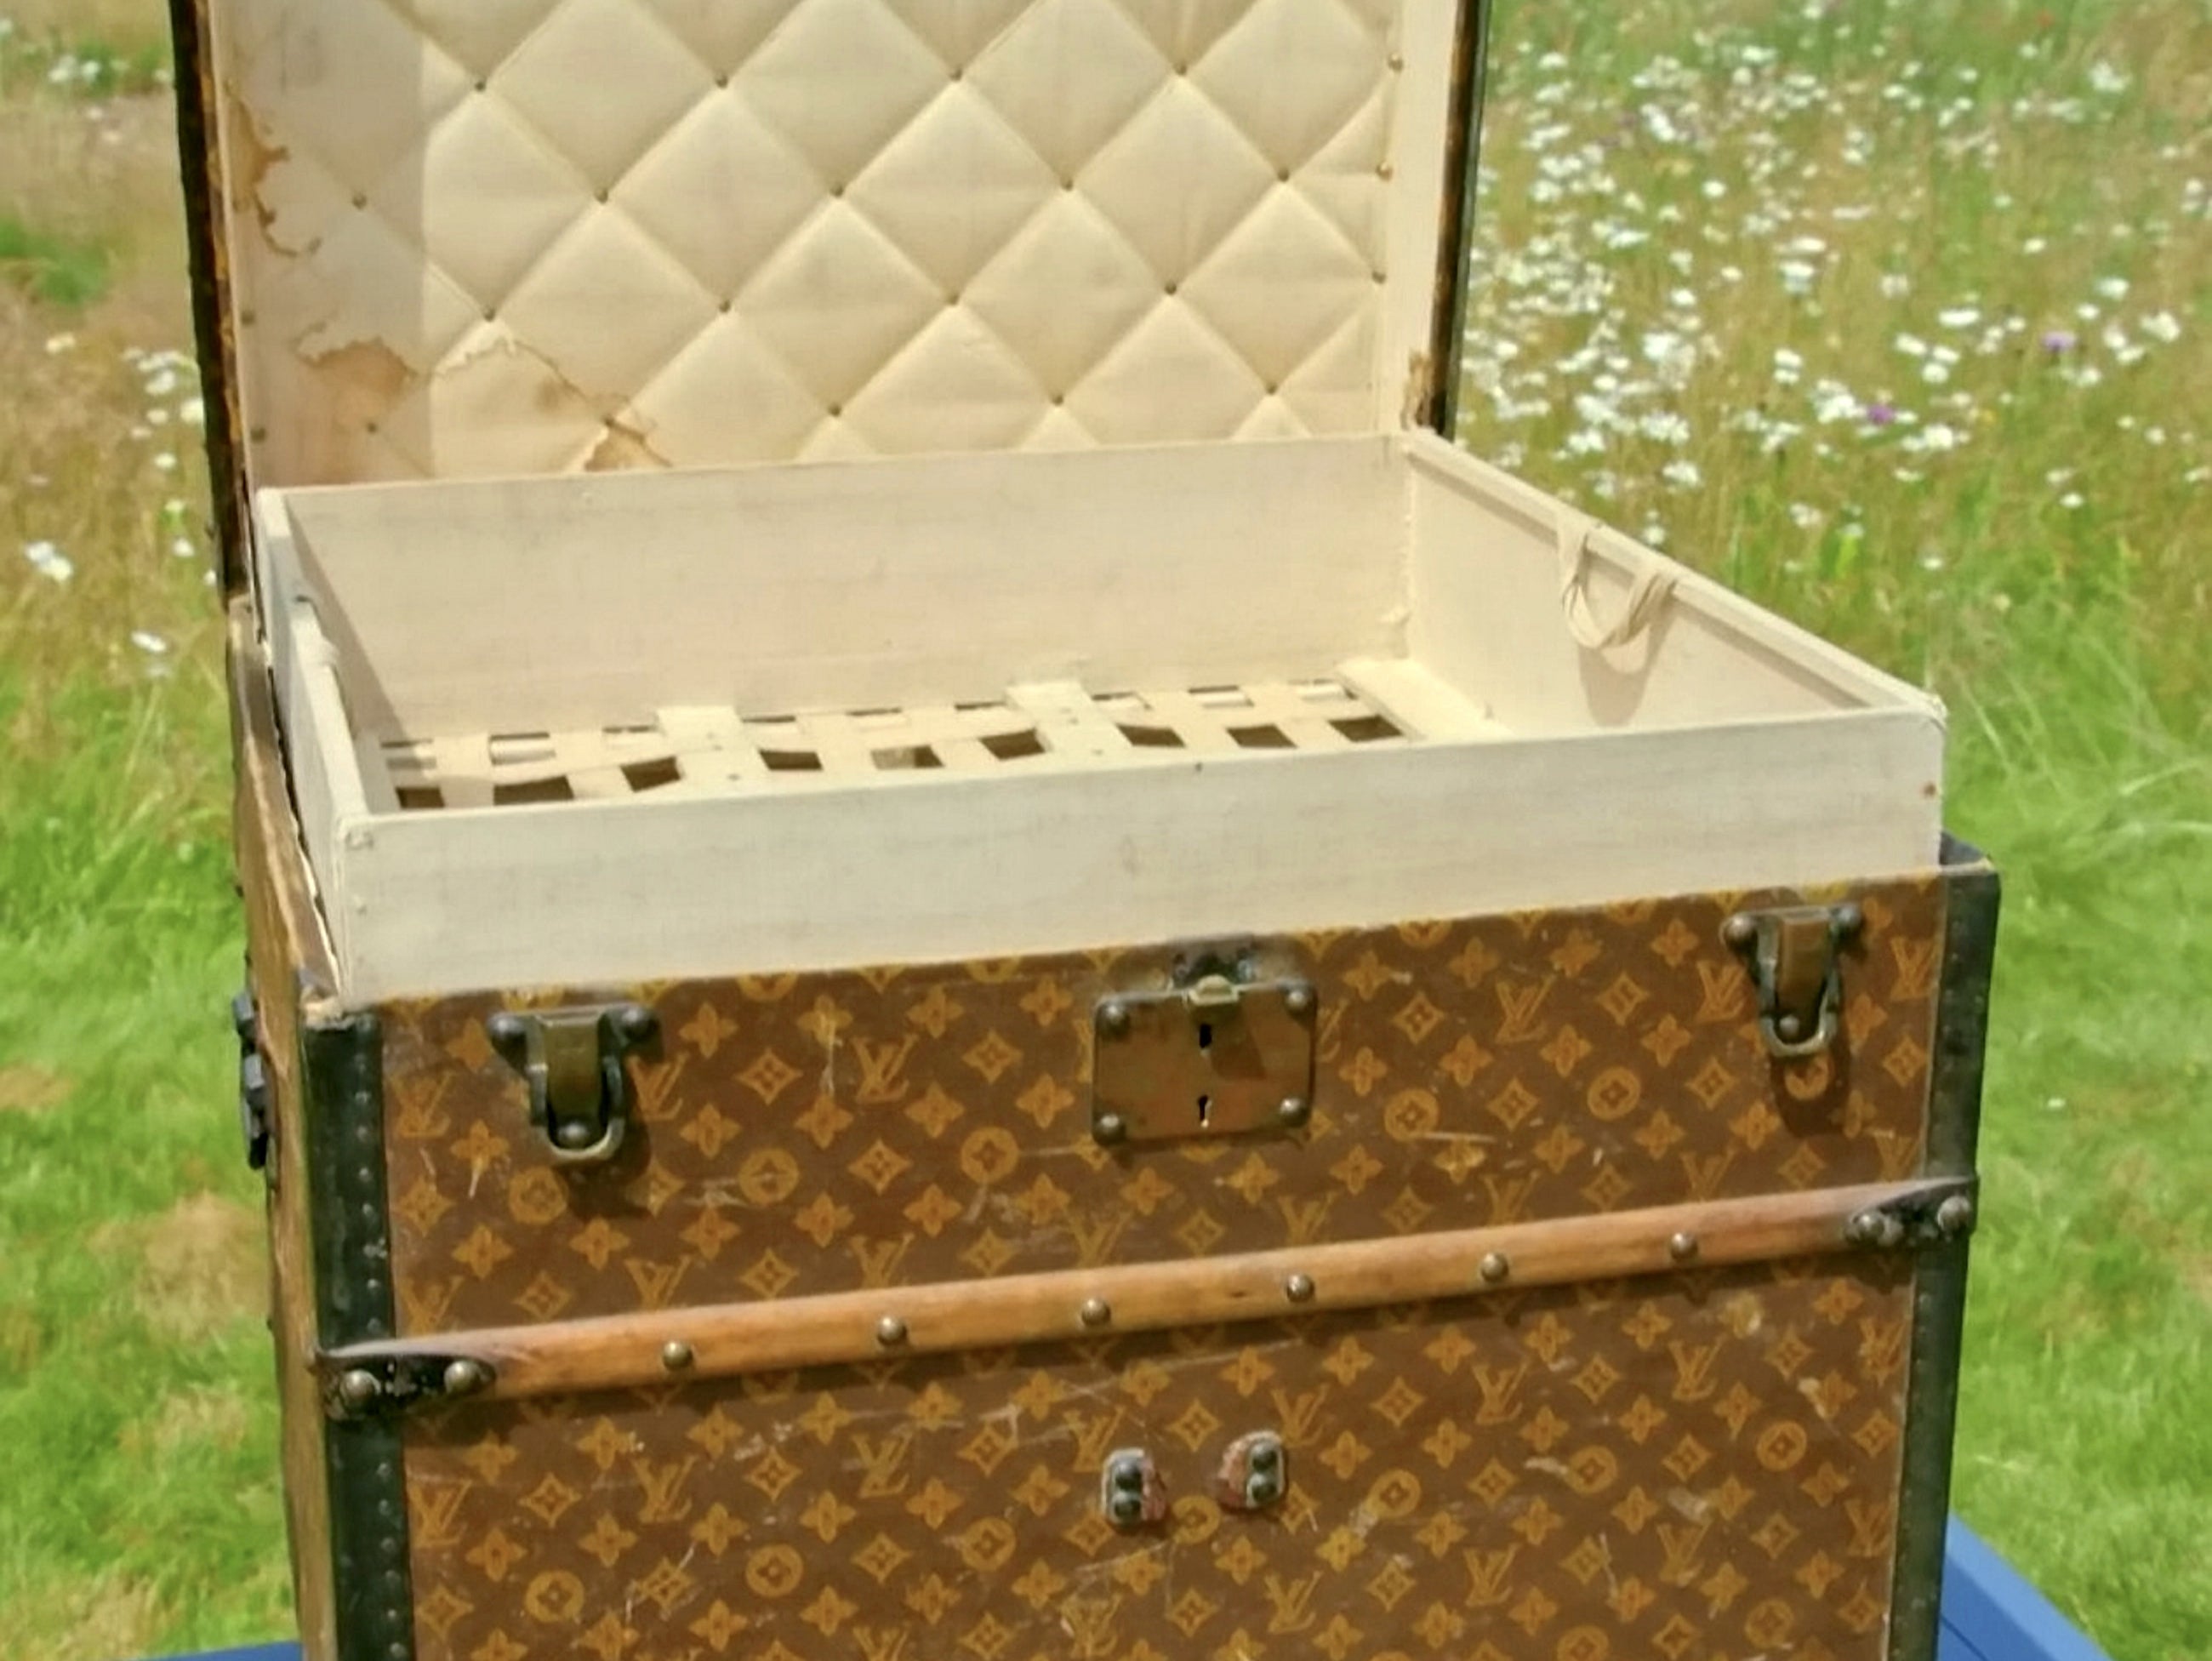 Sold at Auction: Vintage Louis Vuitton Luggage Trunk